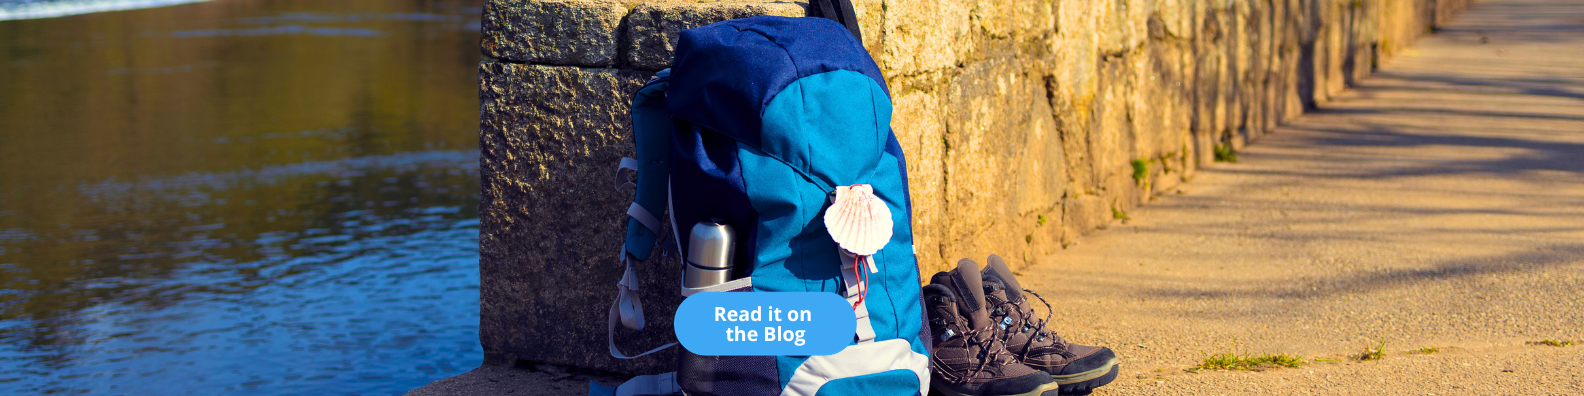 Backpack With a Pair of Boots - Camino Walks Blogpost Barter's Travelnet